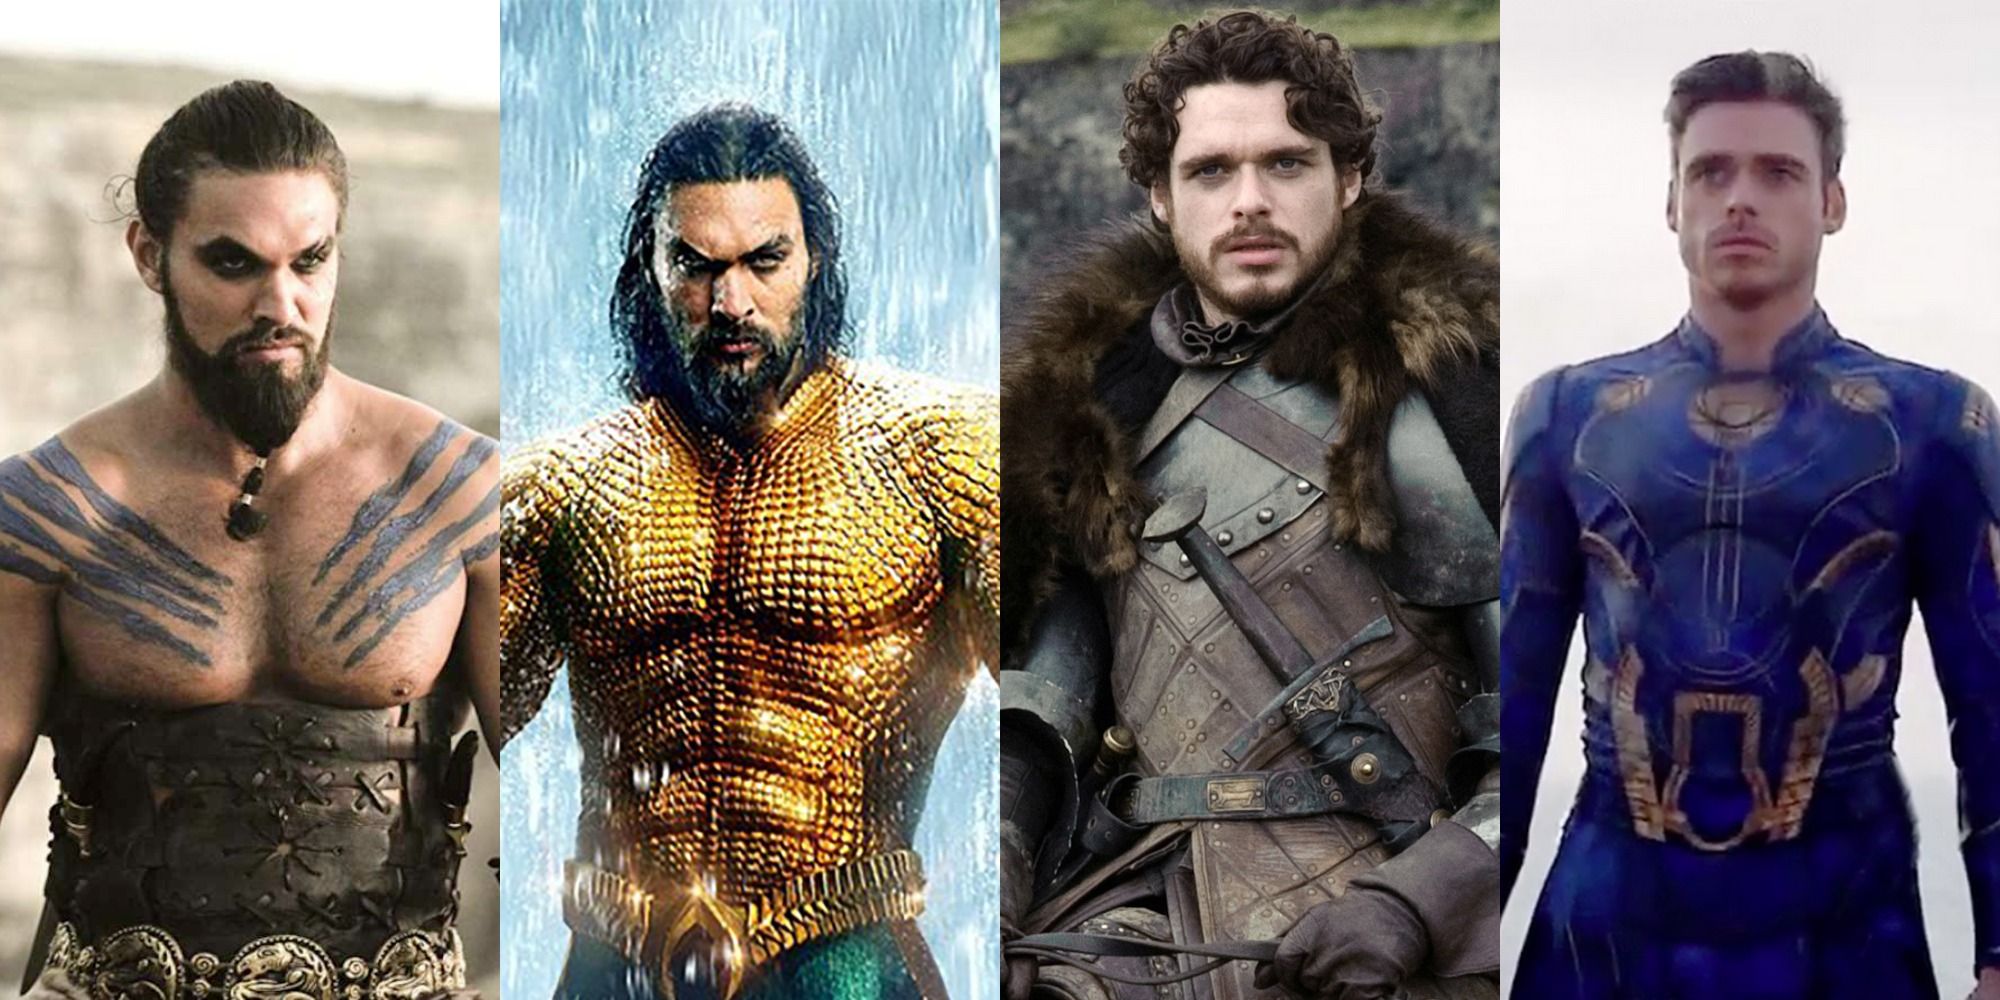 15 Game Of Thrones Actors Who Are In The MCU Or DCEU